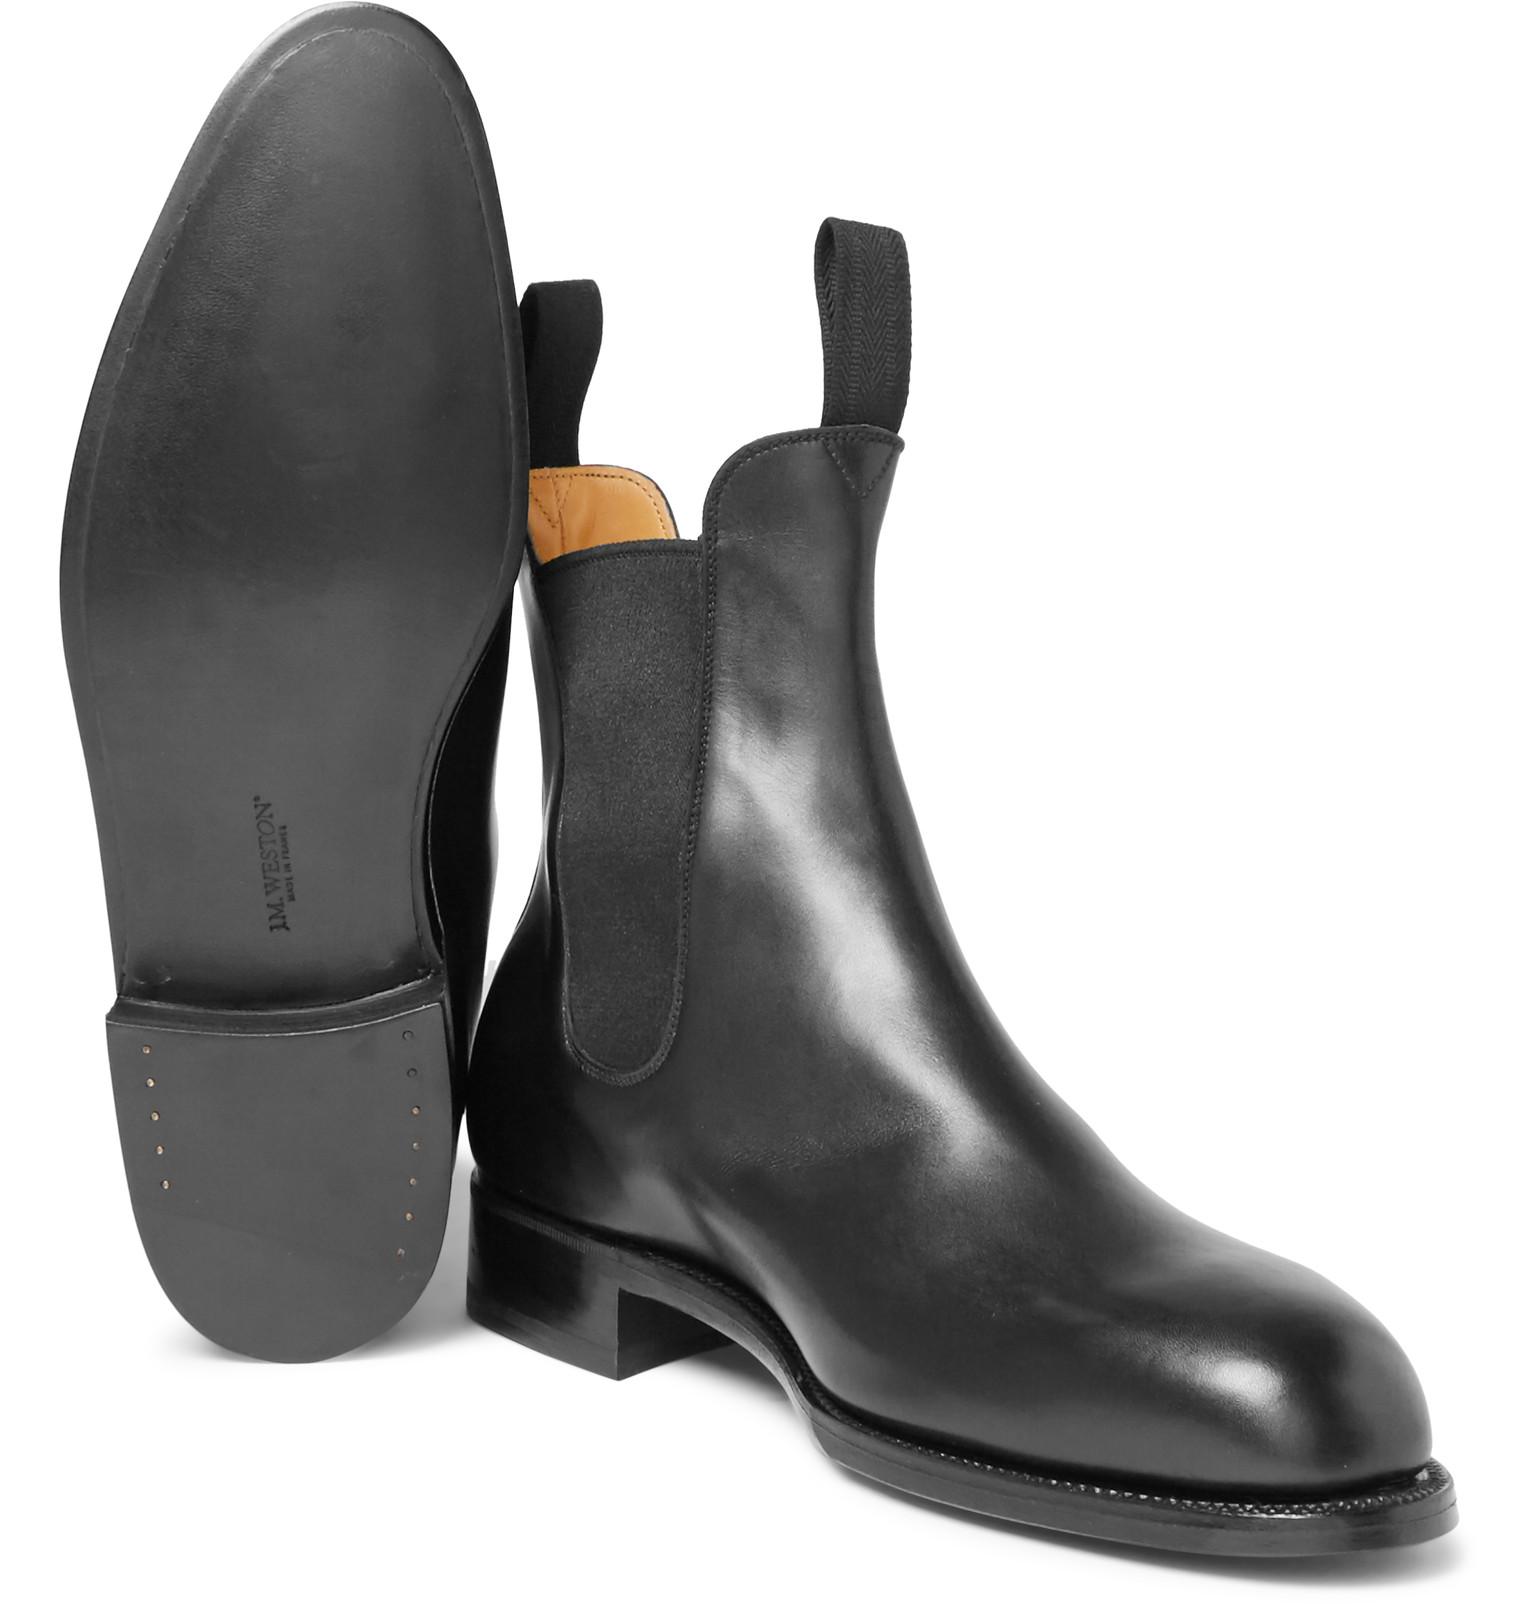 J.M. Weston Leather Chelsea Boots in Black for Men - Lyst